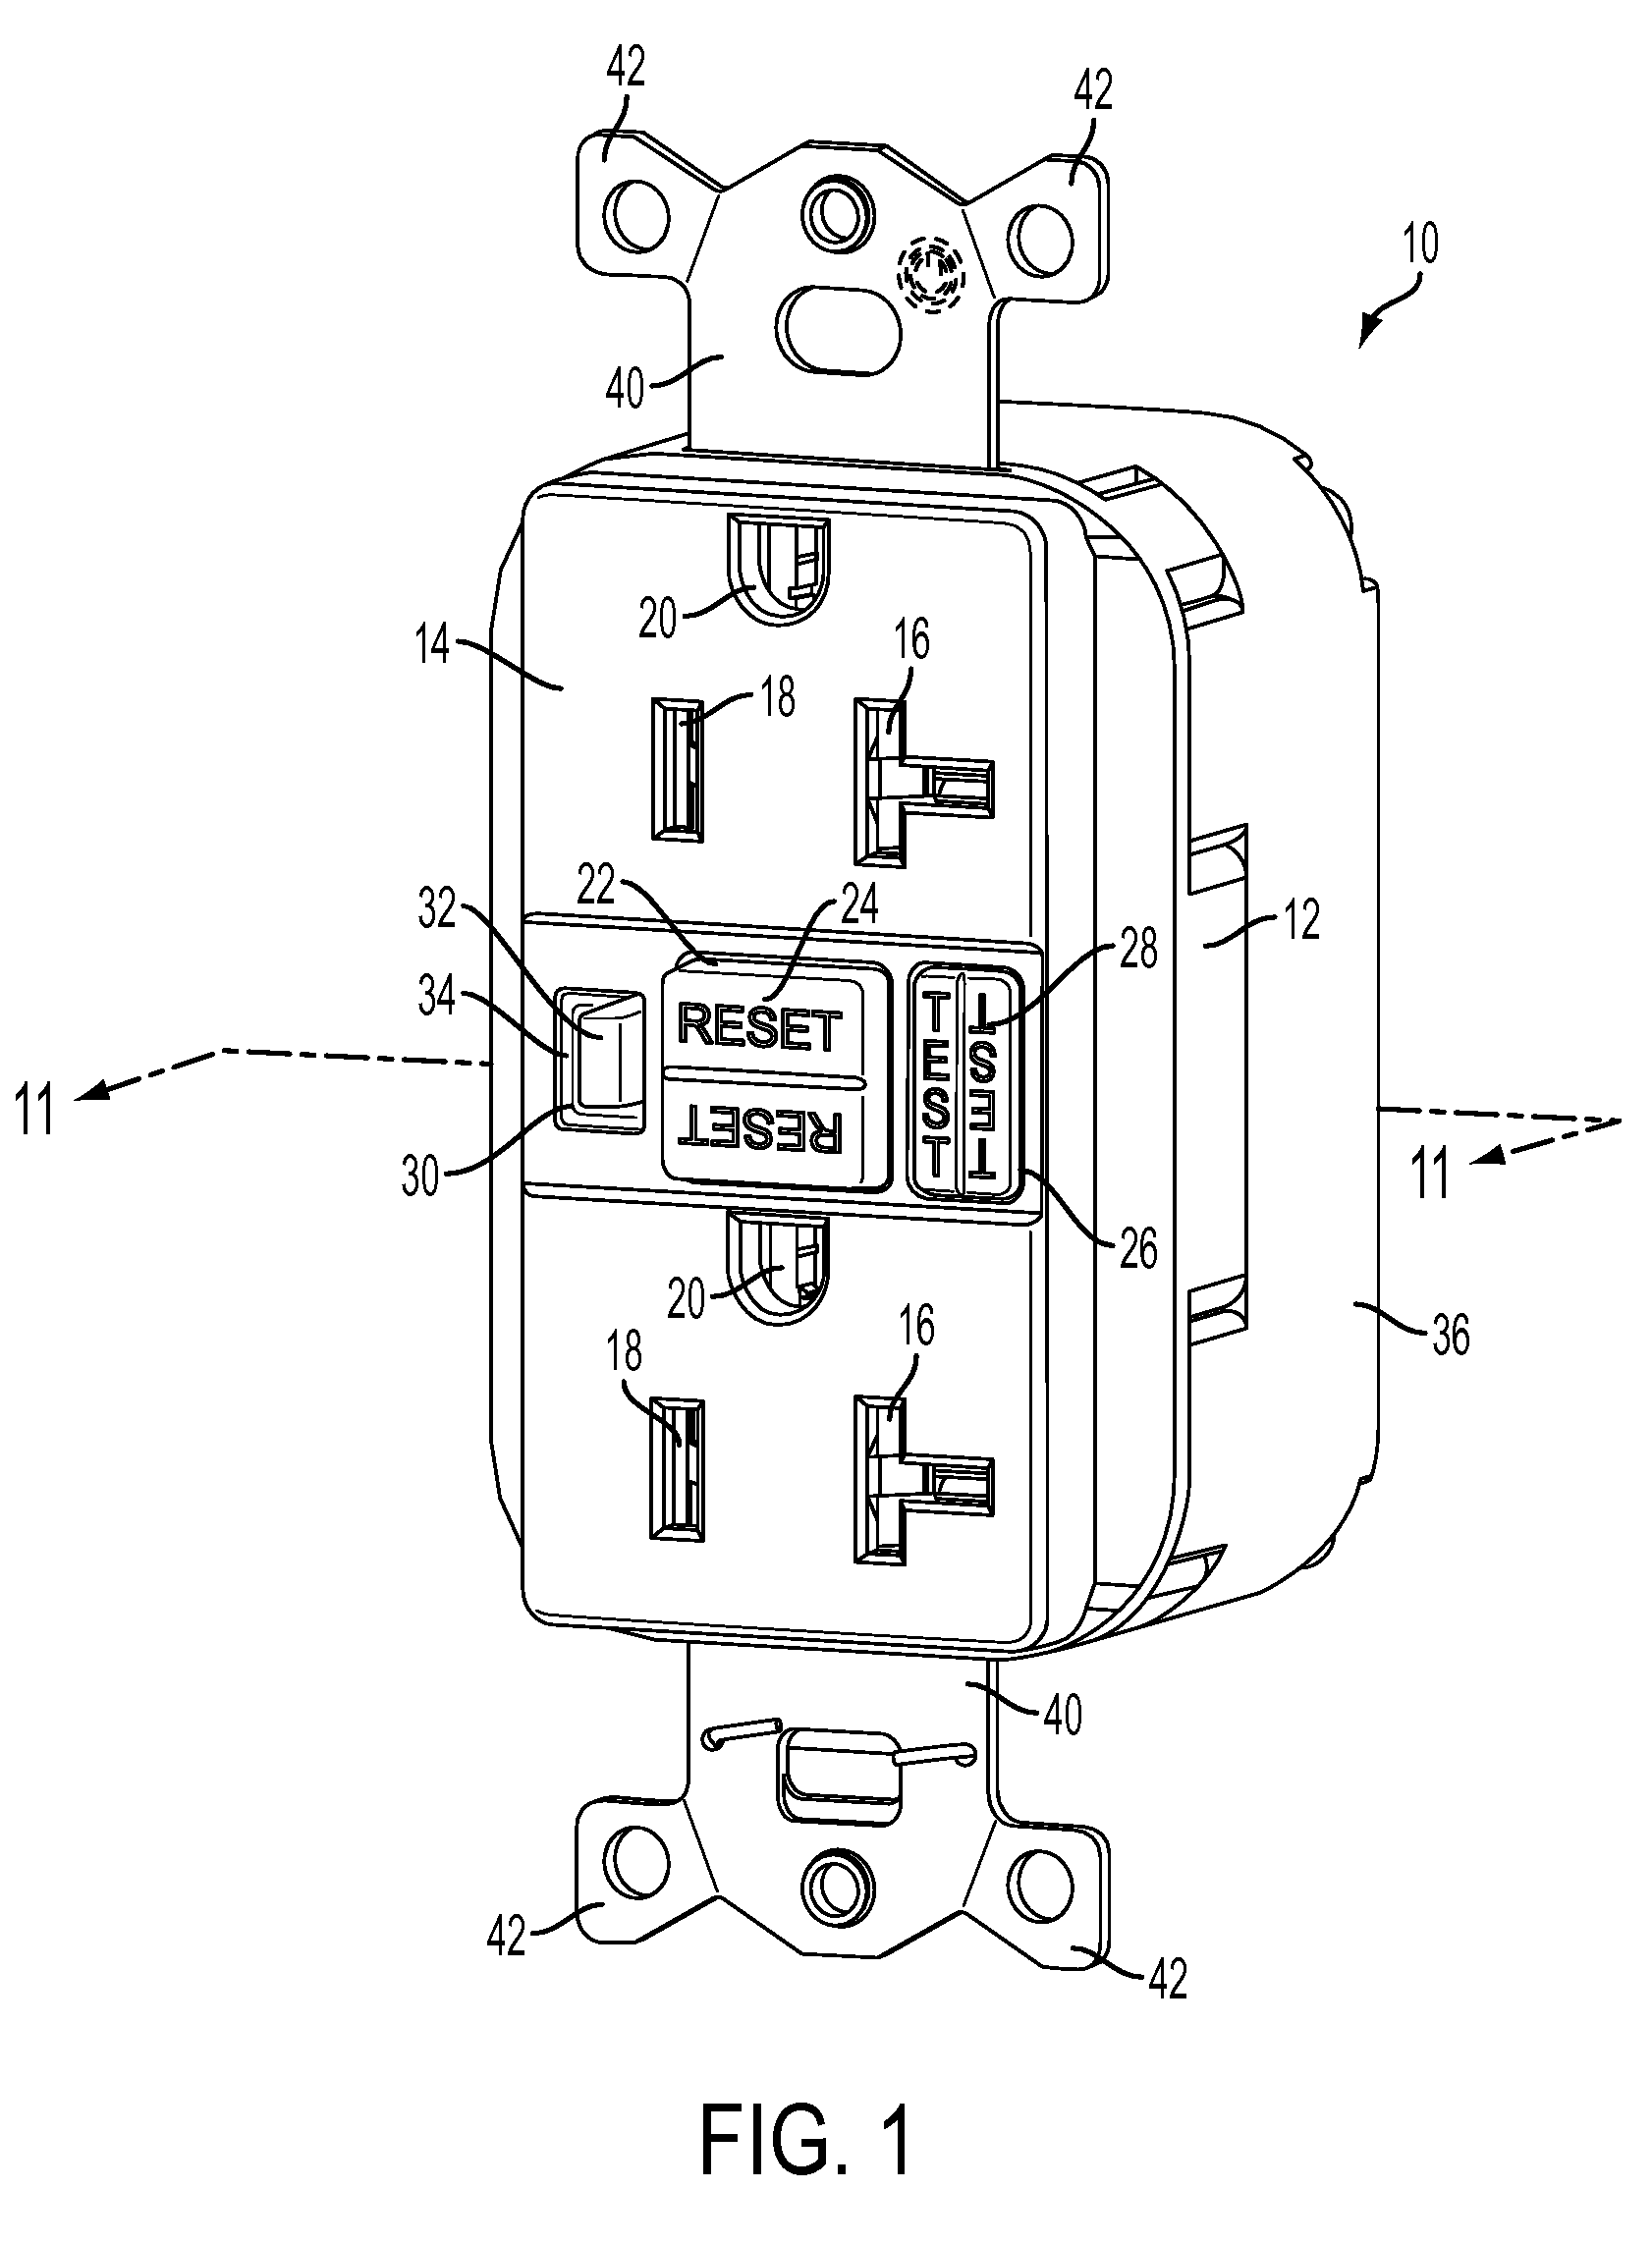 Compact Latching Mechanism for Switched Electrical Device